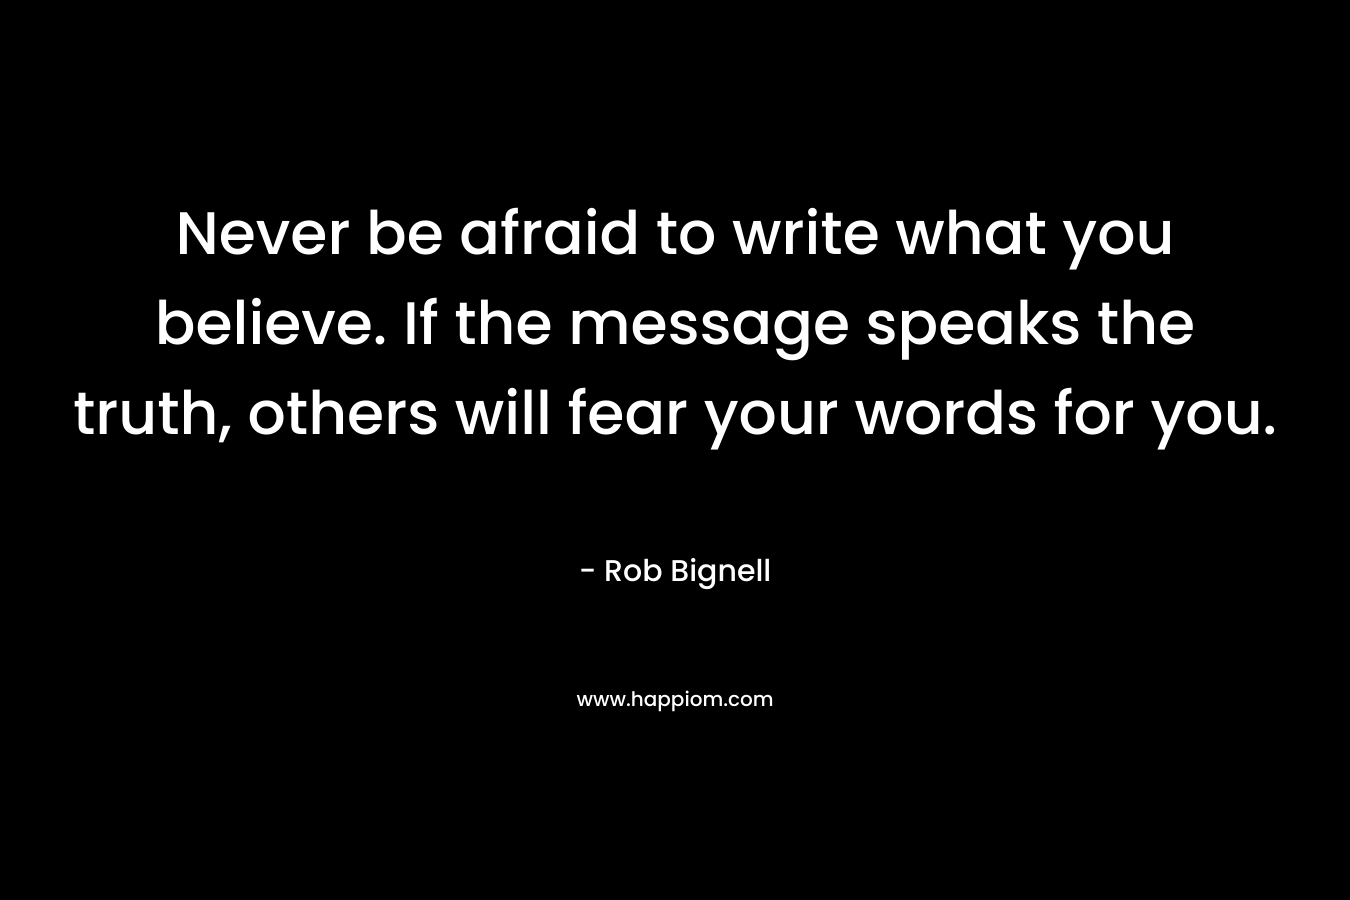 Never be afraid to write what you believe. If the message speaks the truth, others will fear your words for you.